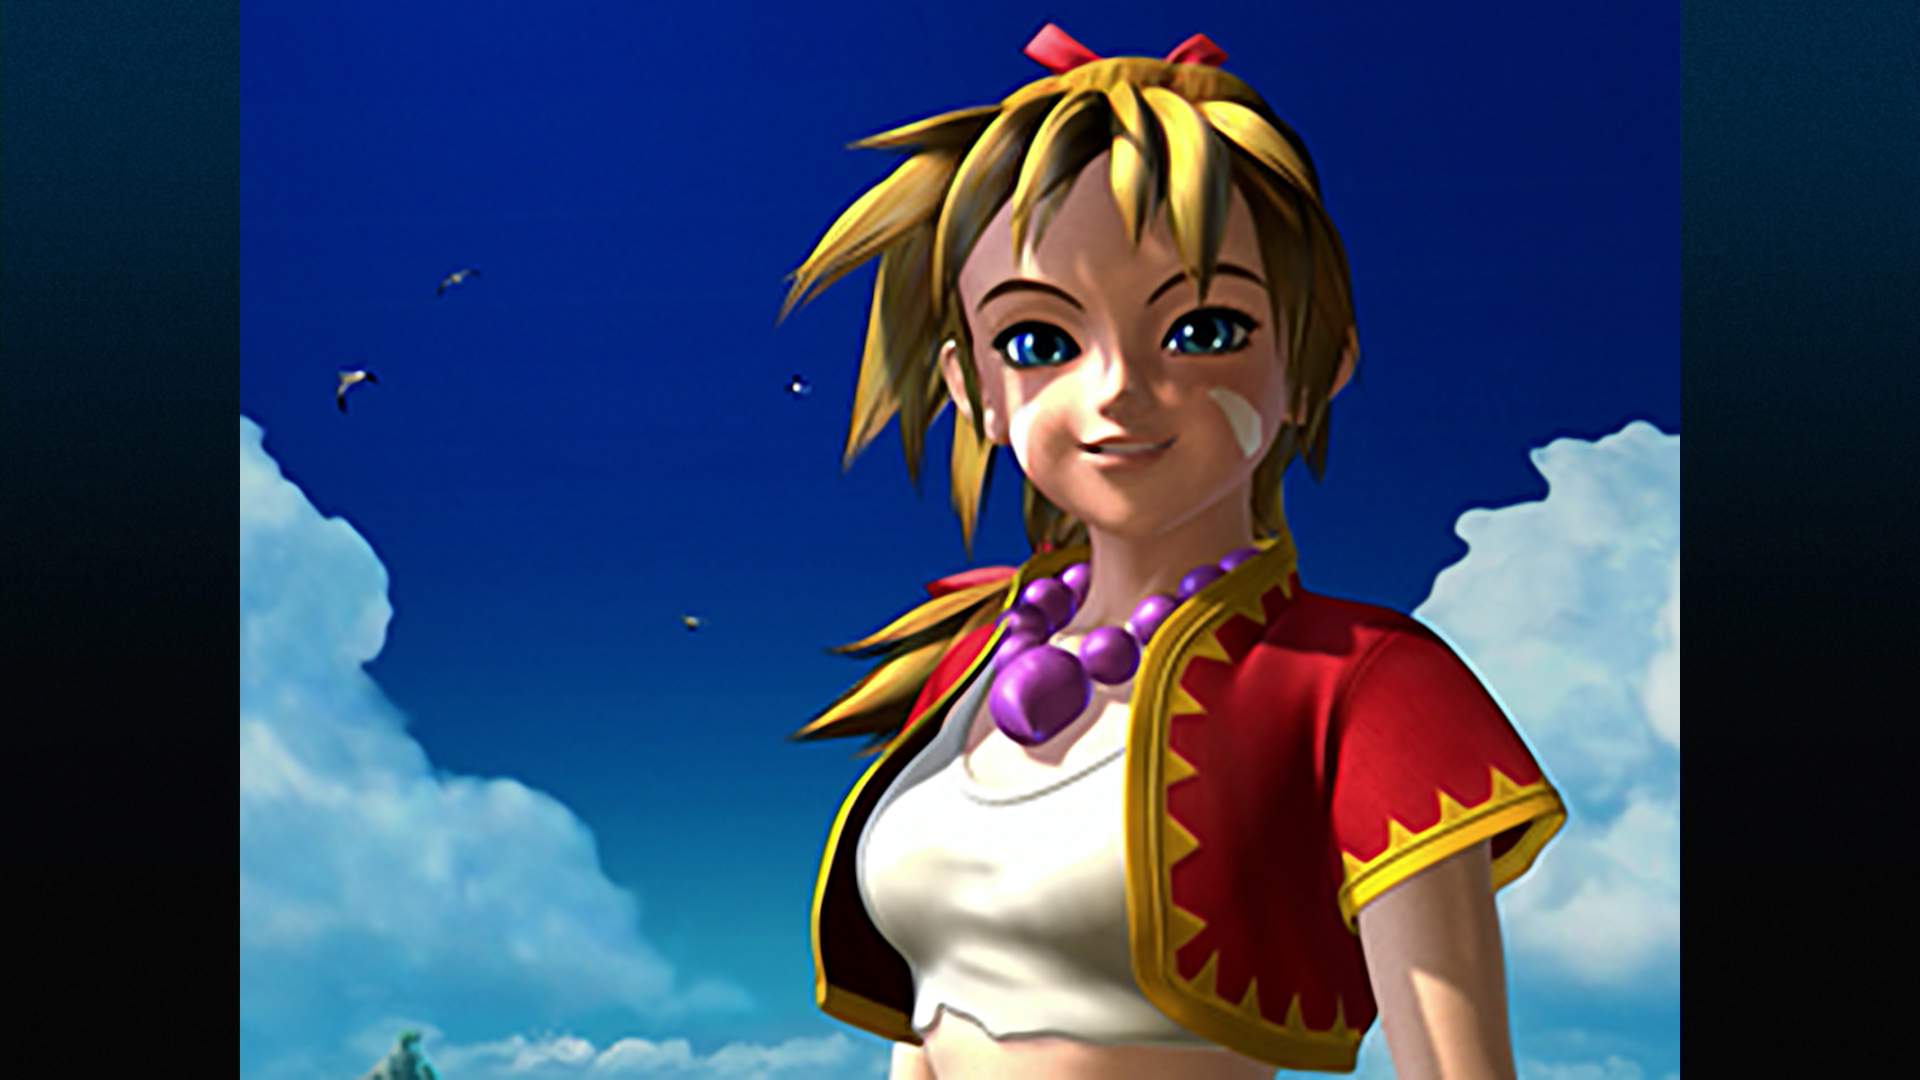 CG still showing a close up of KID from Chrono Cross